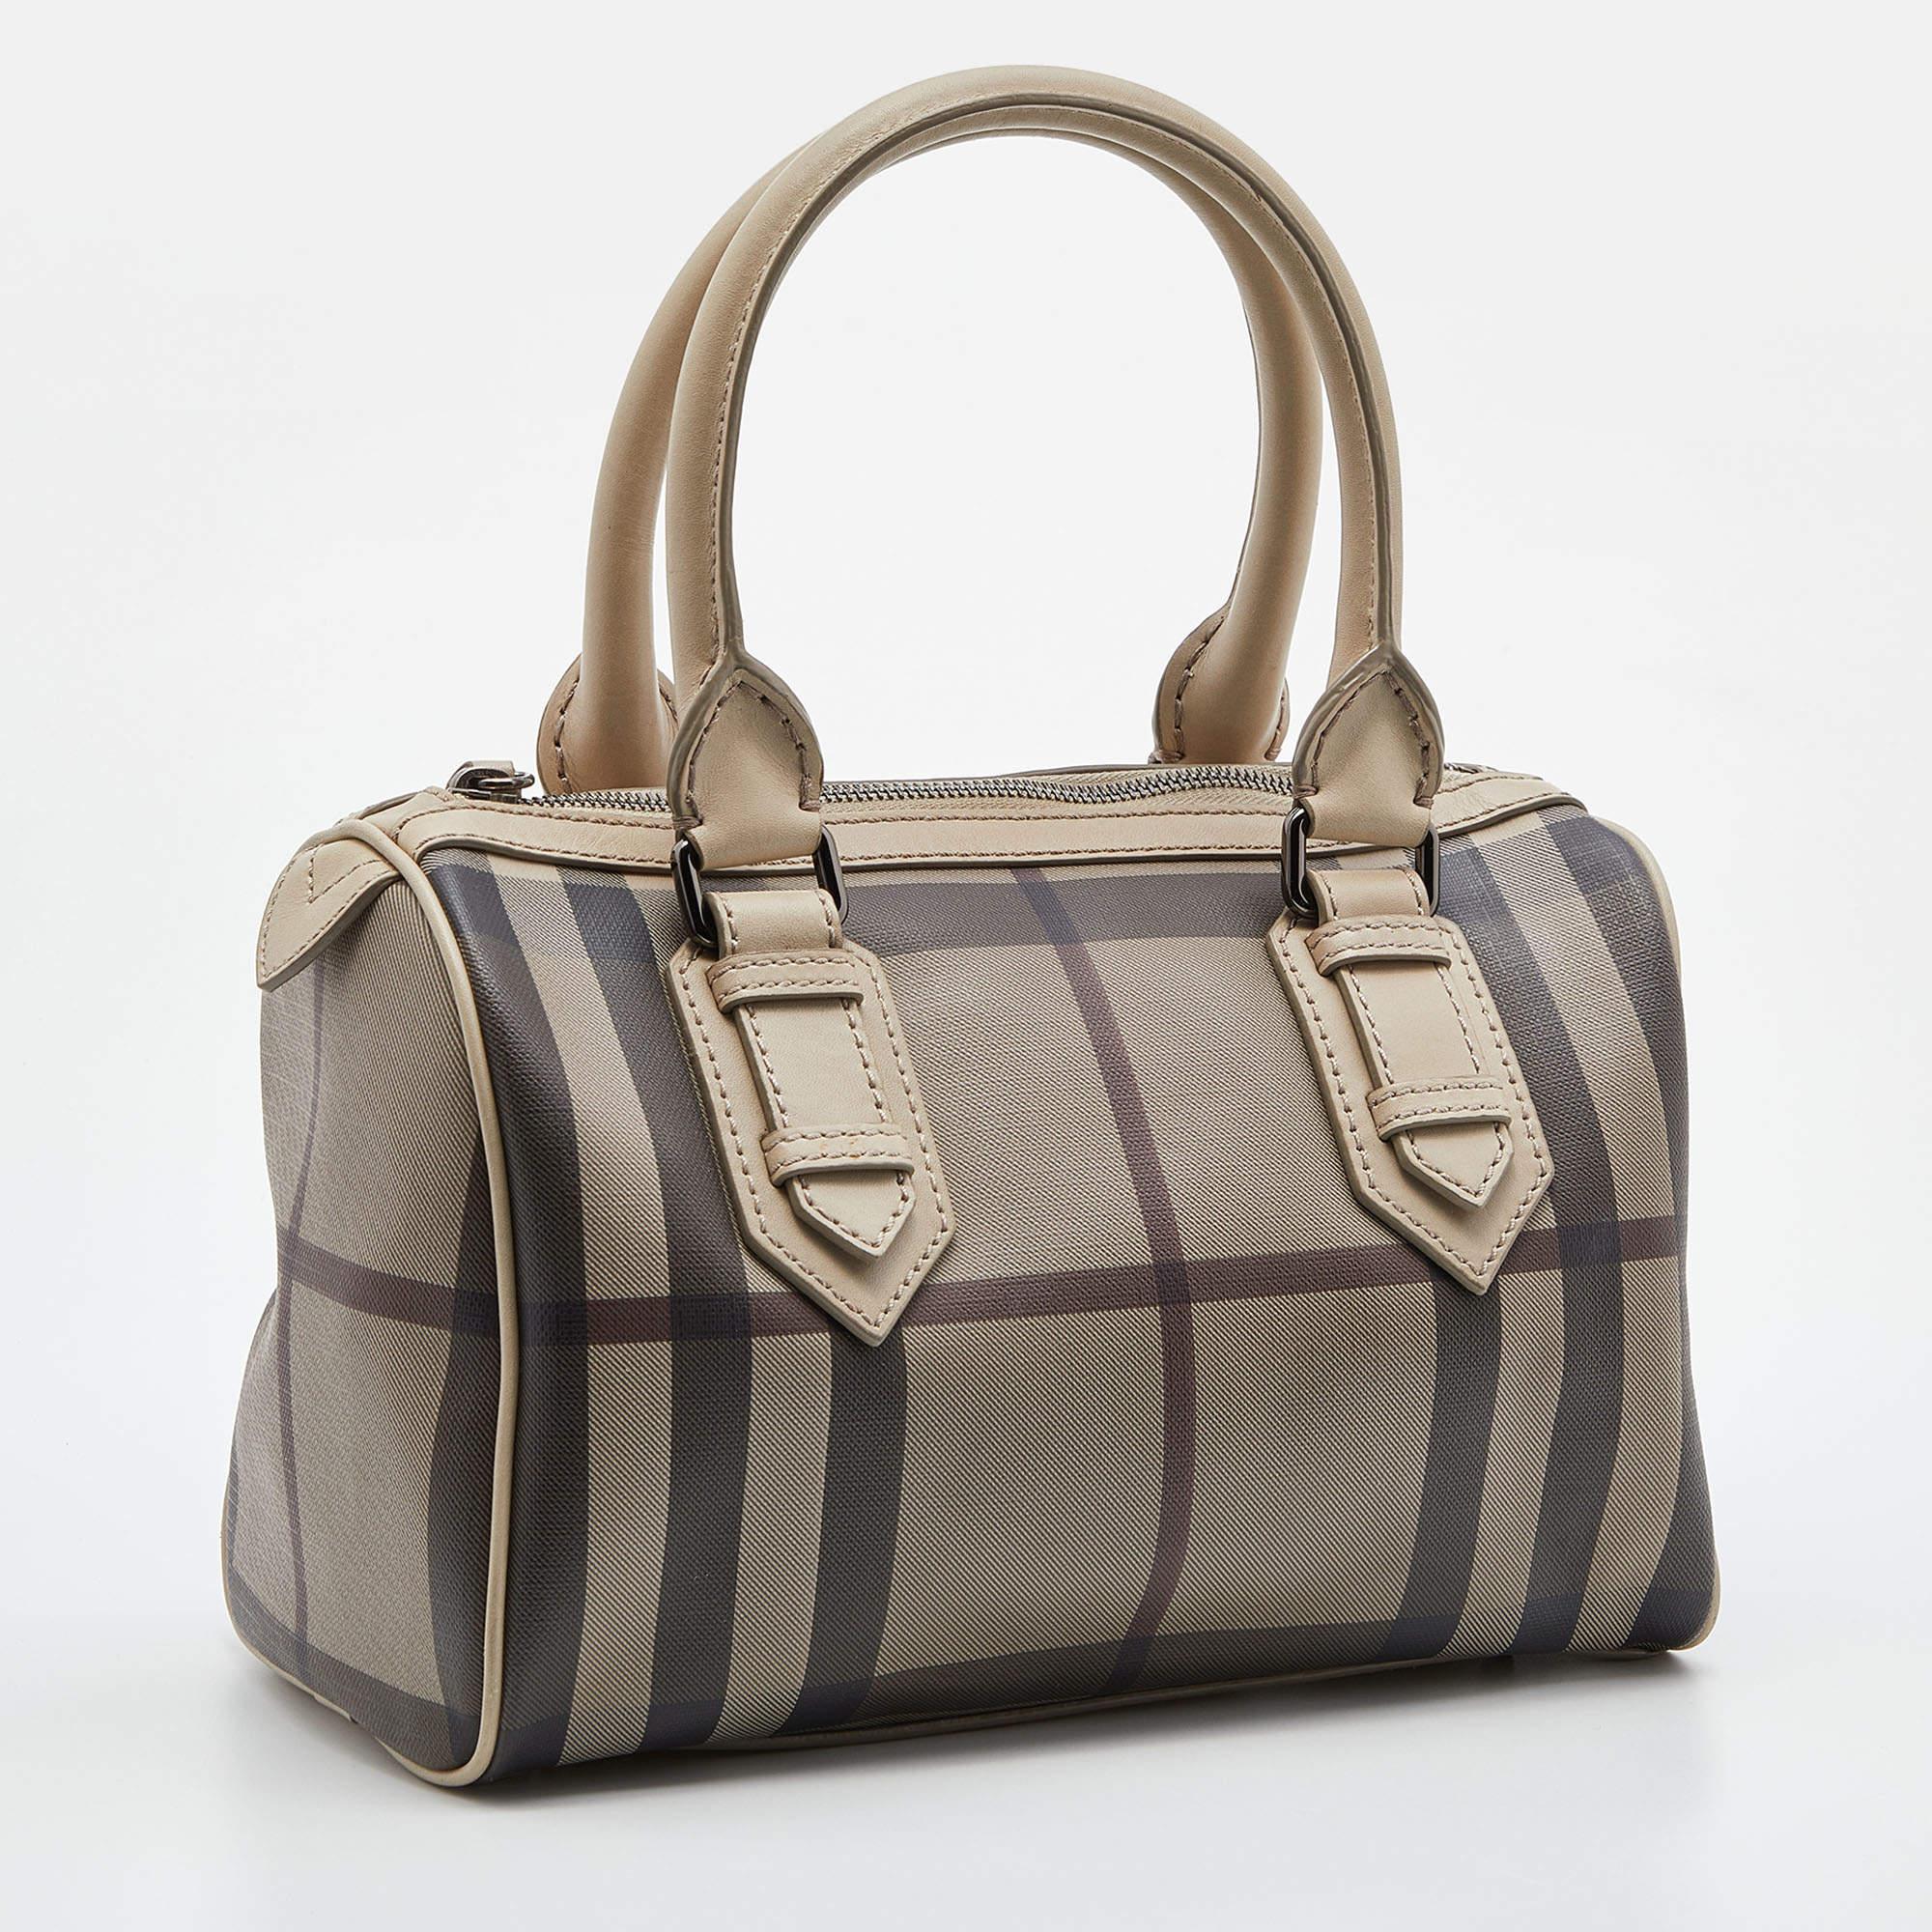 Spacious and captivating, this Chester Boston bag is from Burberry. It has been crafted from their signature Smoked check PVC and accented with leather trims and silver-tone hardware. It is equipped with a well-sized canvas interior, two rolled